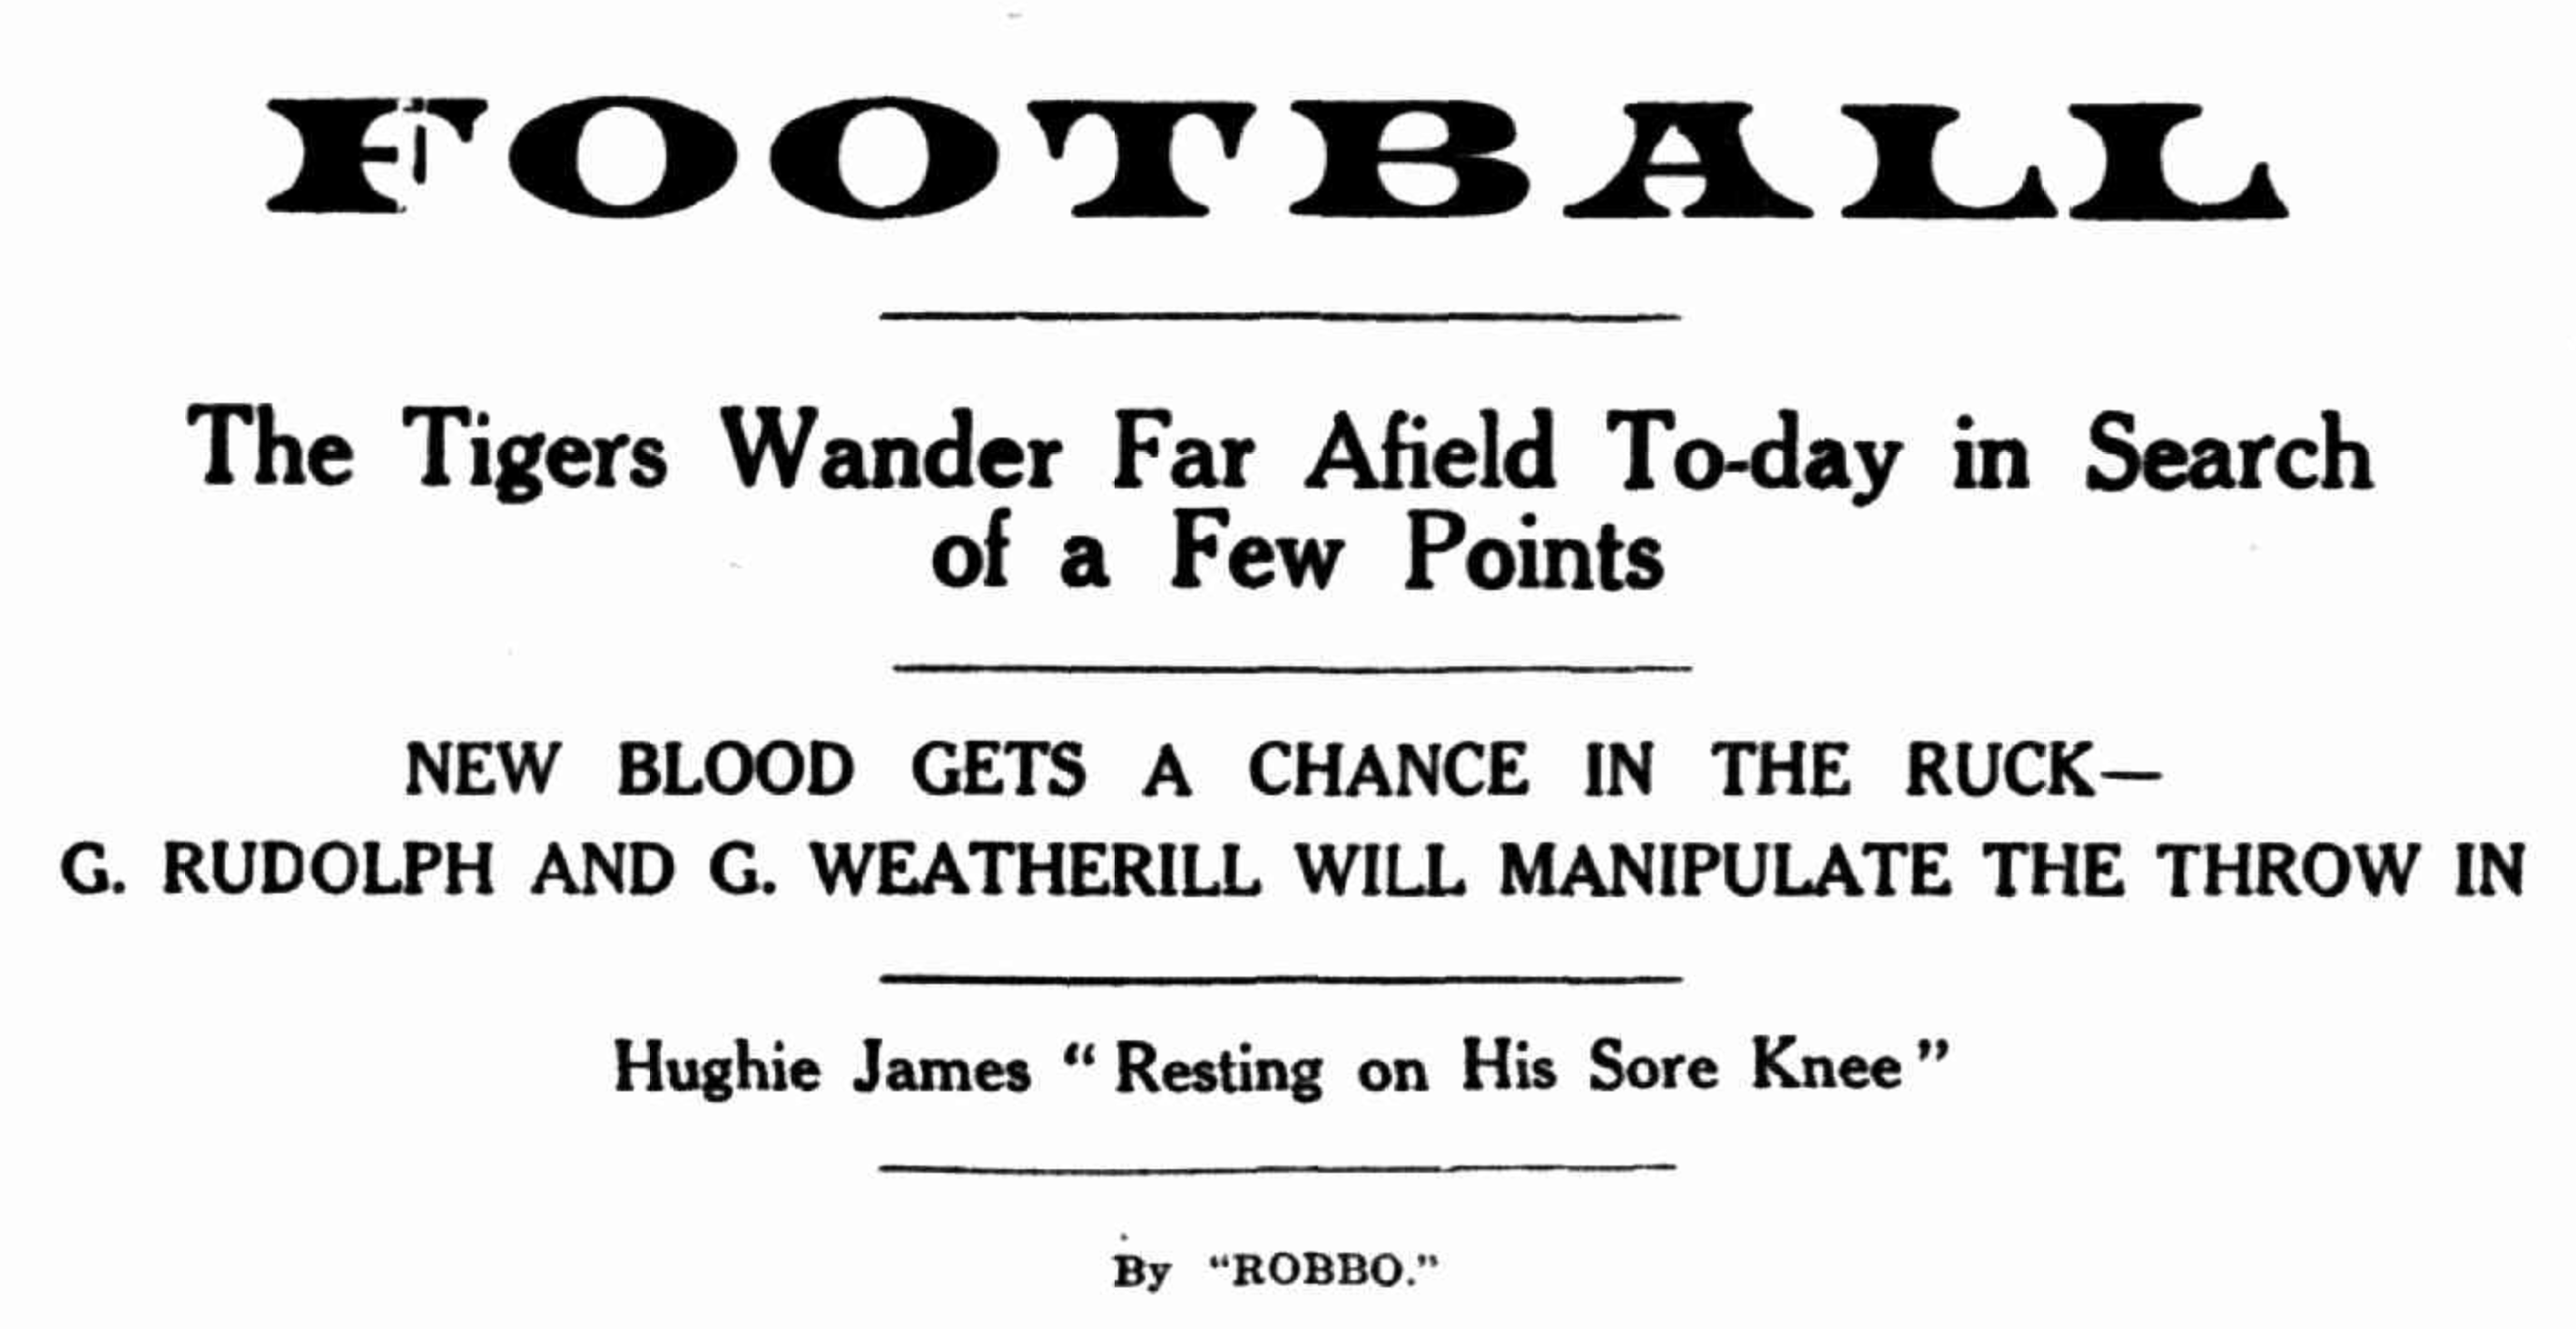 Newspaper clipping that says: Football The Tigers Wander Far Afield To-day in search of a Few Points NEW BLOOD GETS A CHANCE IN THE RUCK— G. RUDOLPH AND G. WEATHERILL WILL MANIPULATE THE THROW IN Hughie James " Resting on His Sore Knee" By "ROBBO.'